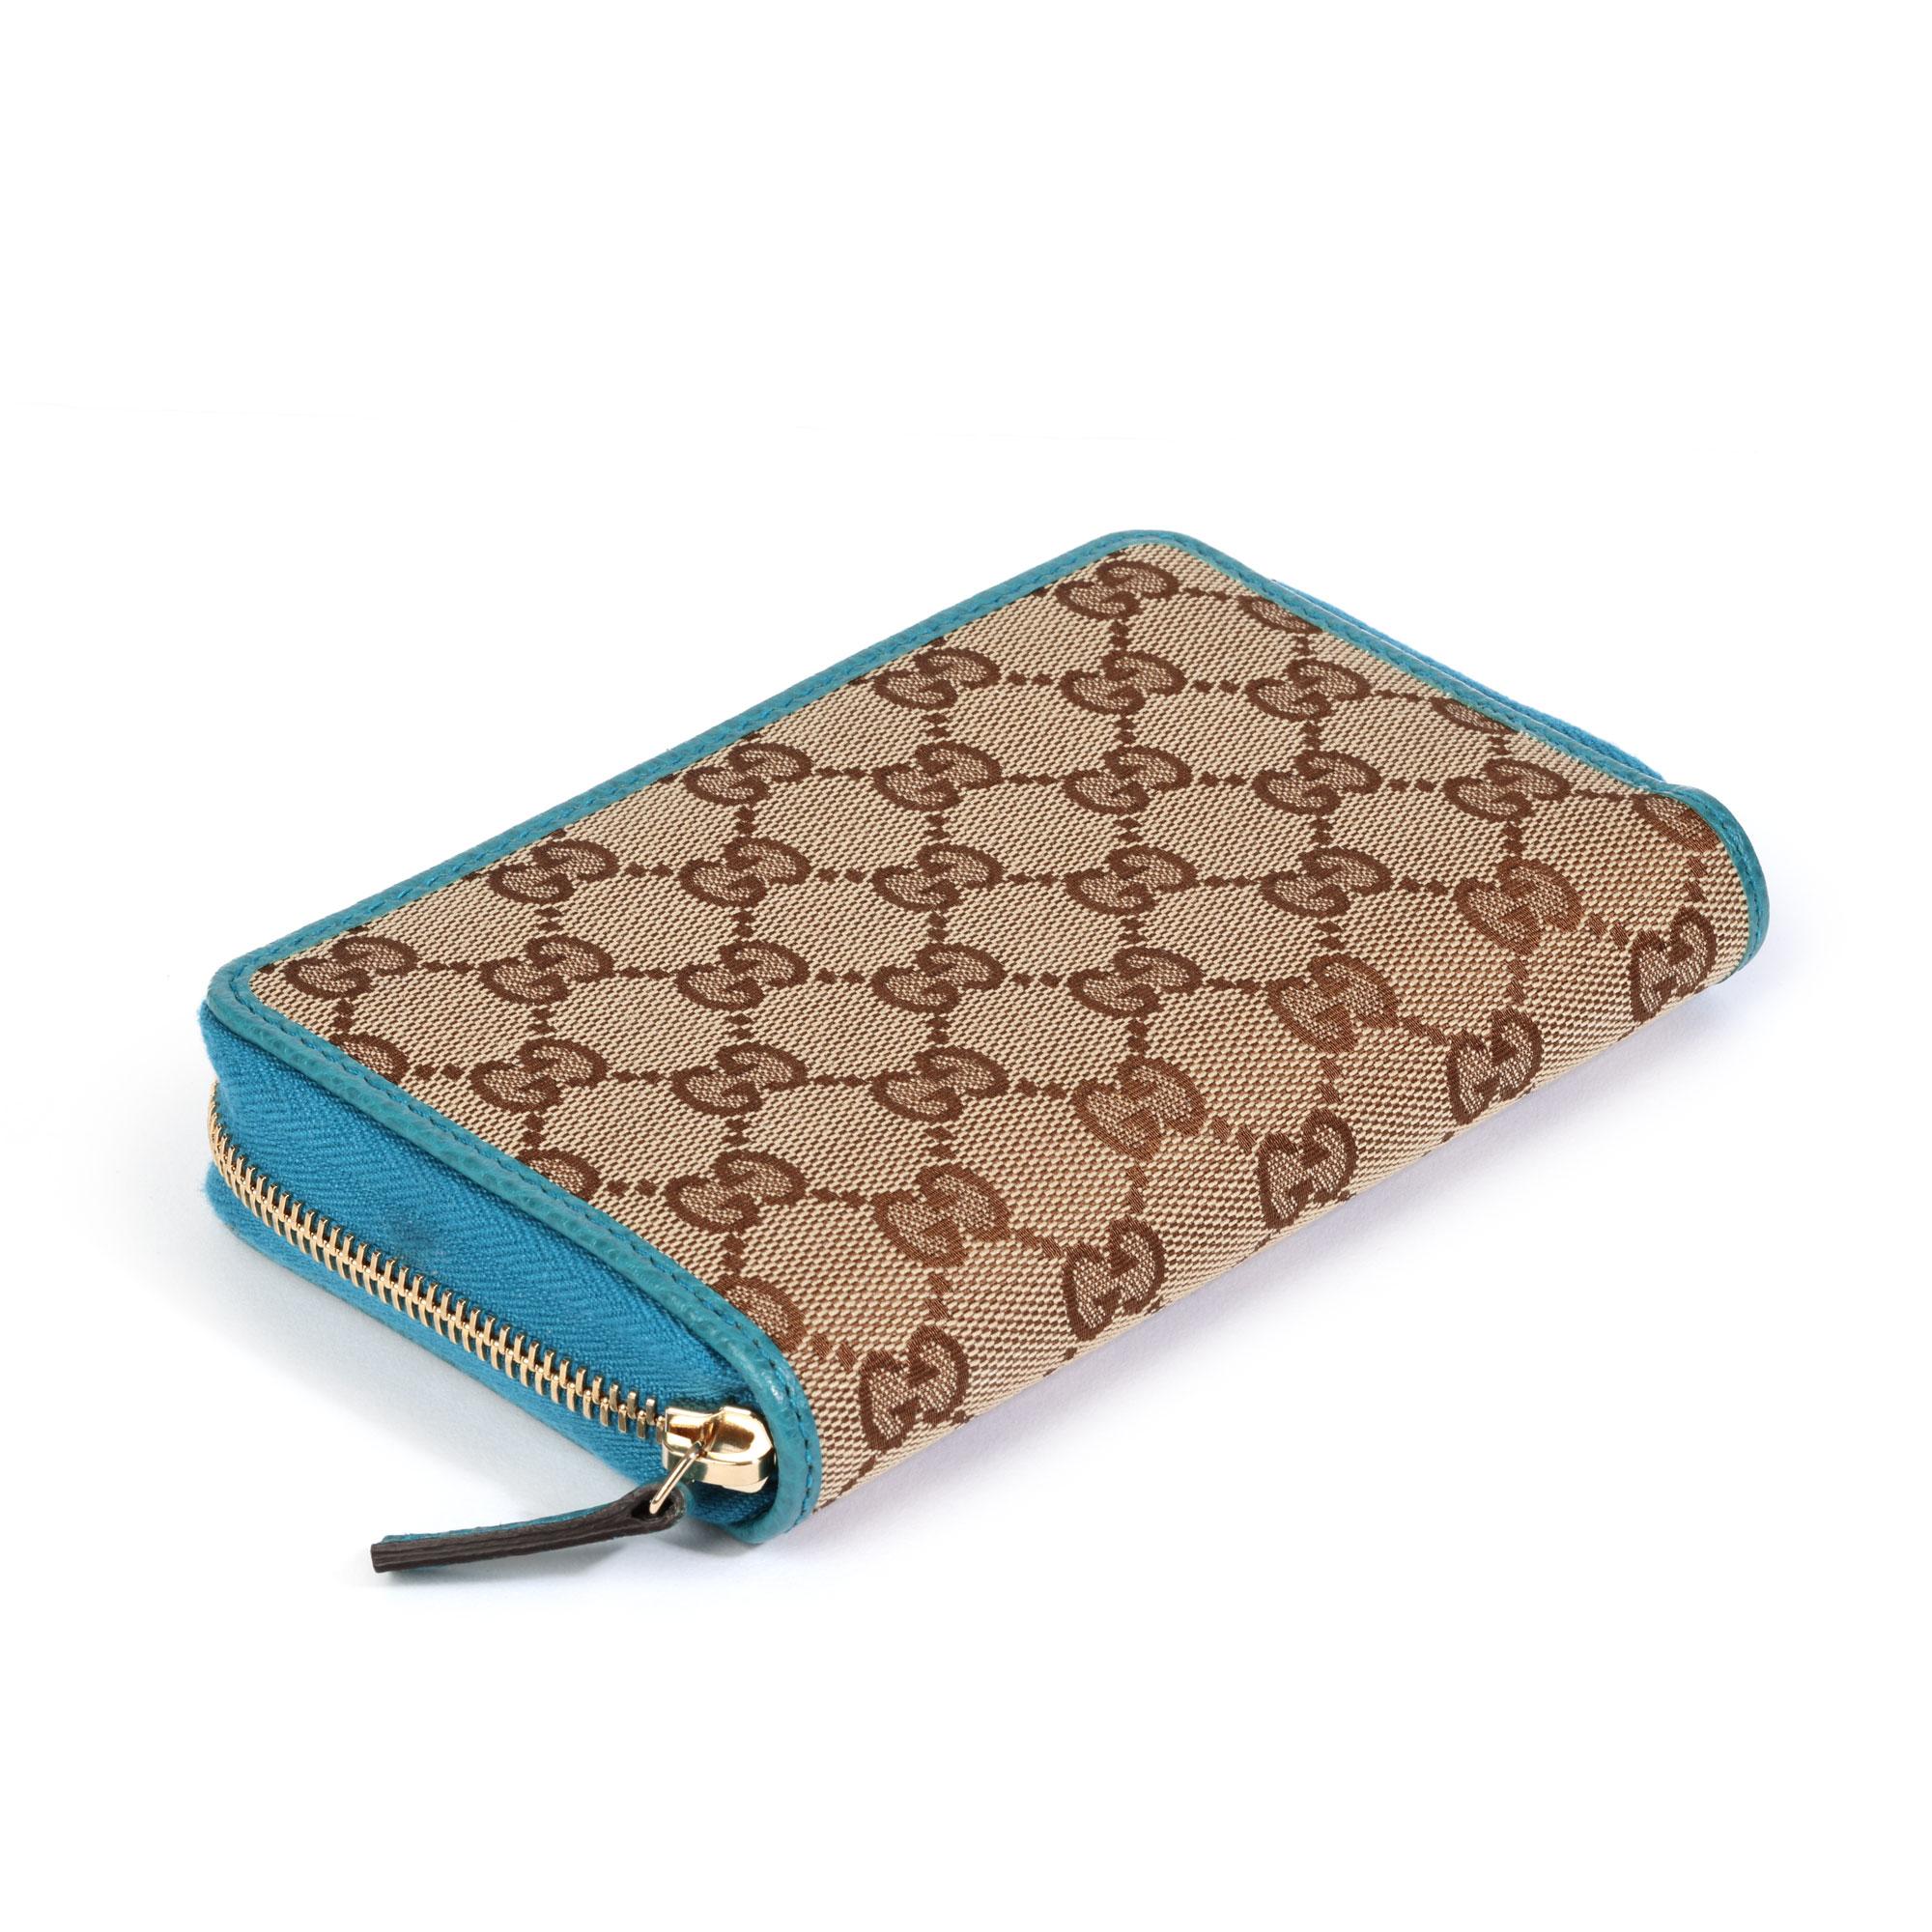 Gucci BEIGE GG CANVAS MONOGRAM ZIP AROUND WALLET

CONDITION NOTES
The exterior is in excellent condition with minimal signs of use.
The interior is in excellent condition with minimal signs of use.
The hardware is in excellent condition with light